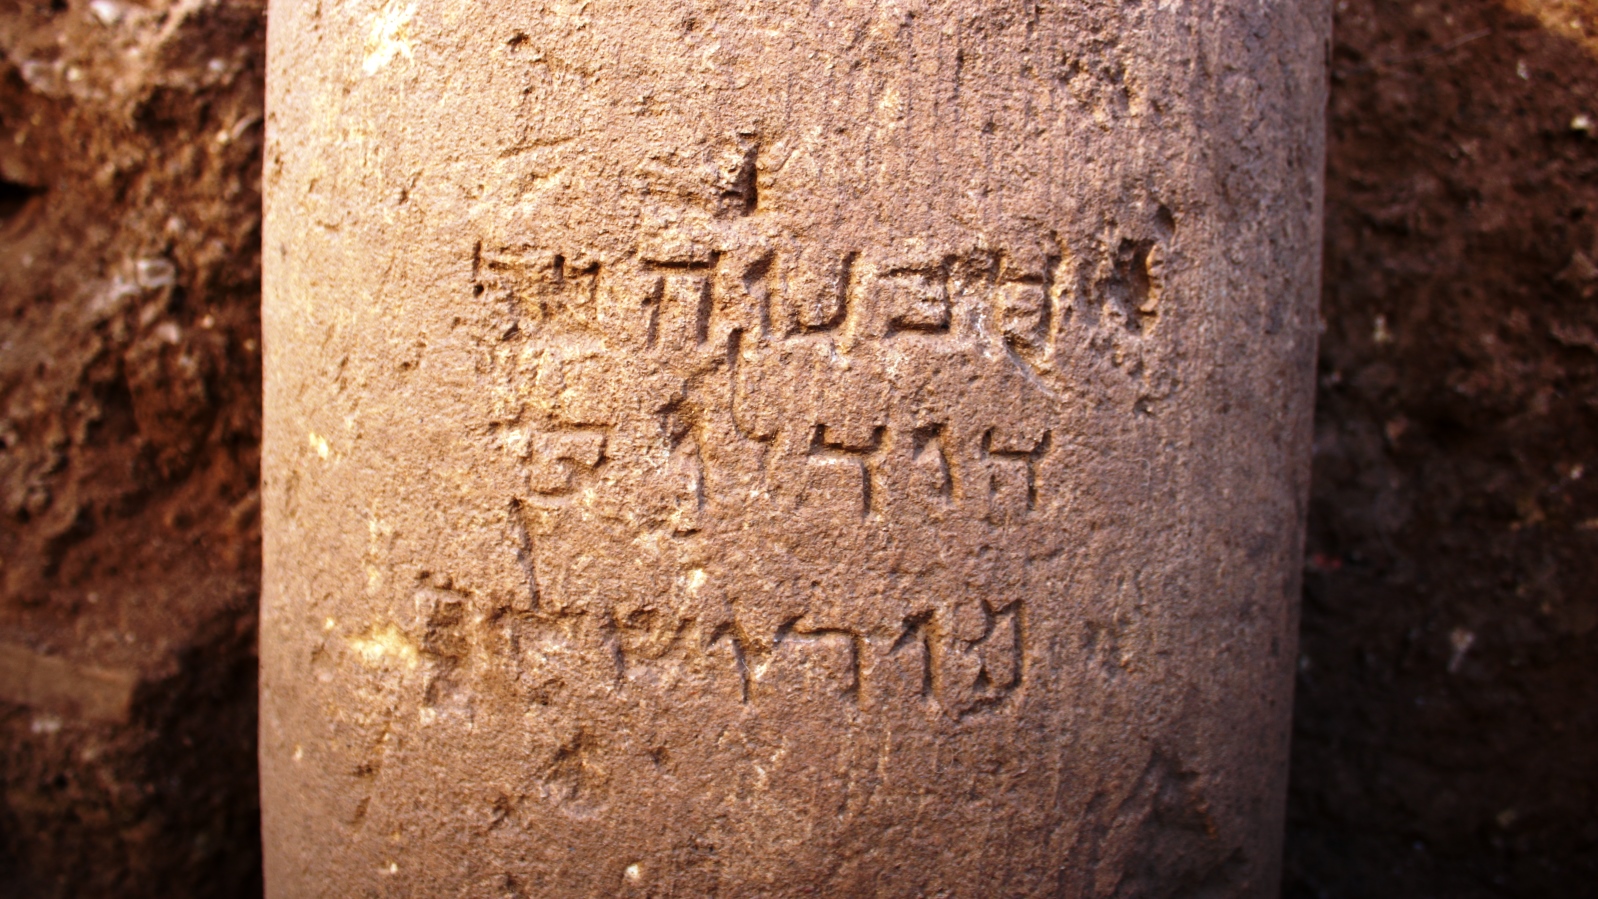 The “Jerusalem” inscription as it was found in the excavation. Photo by Danit Levy/Israel Antiquities Authority